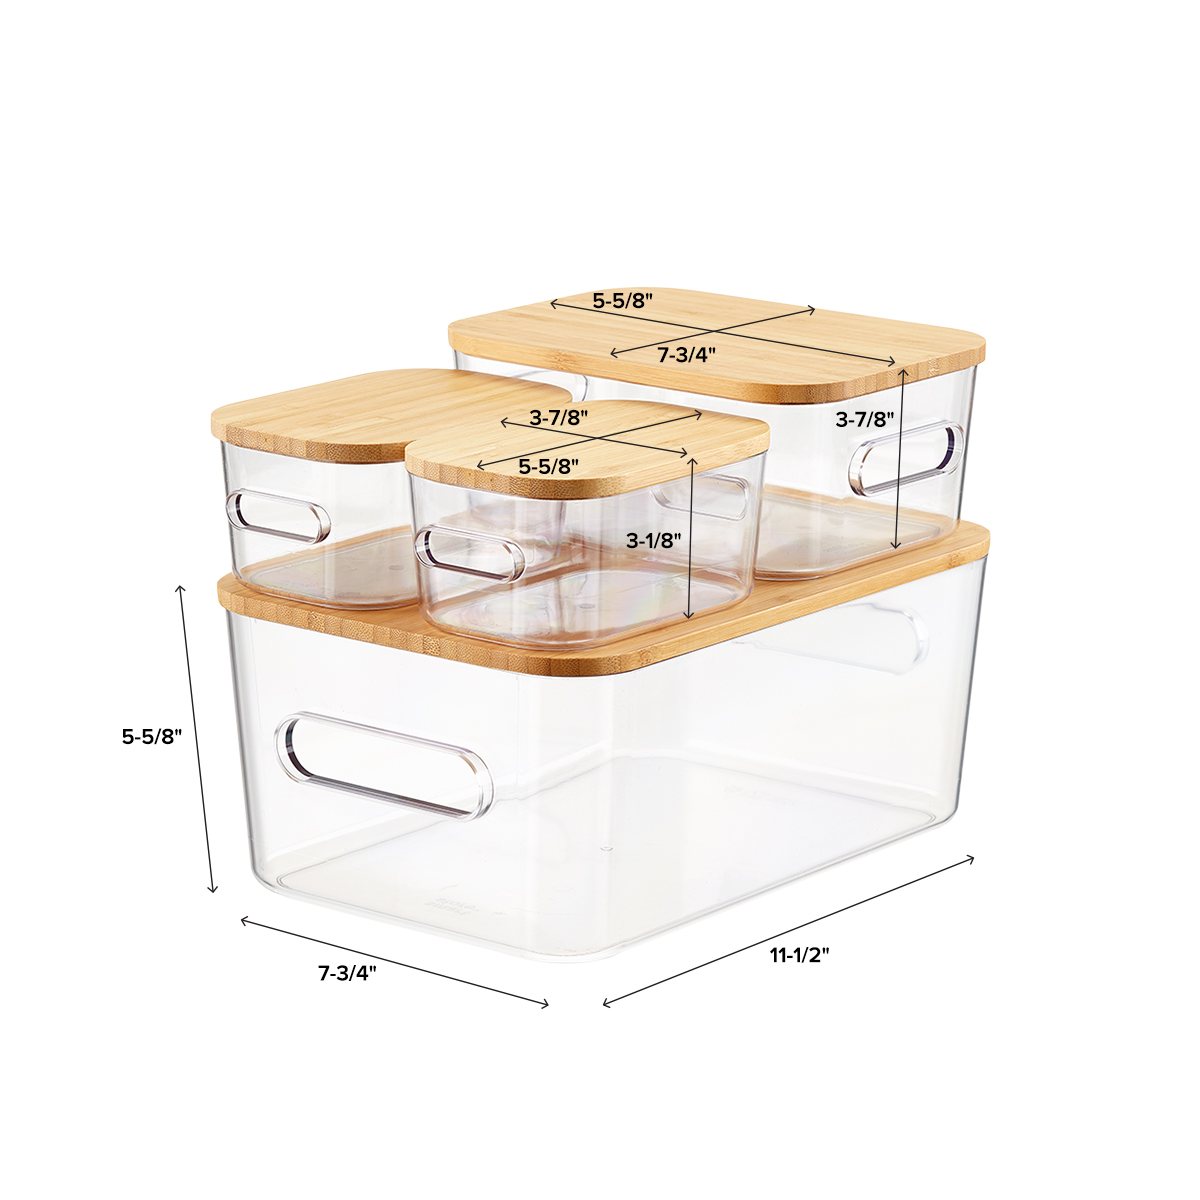 SALE! 6 Pack Plastic Storage Baskets - Small Organizer Boxes for